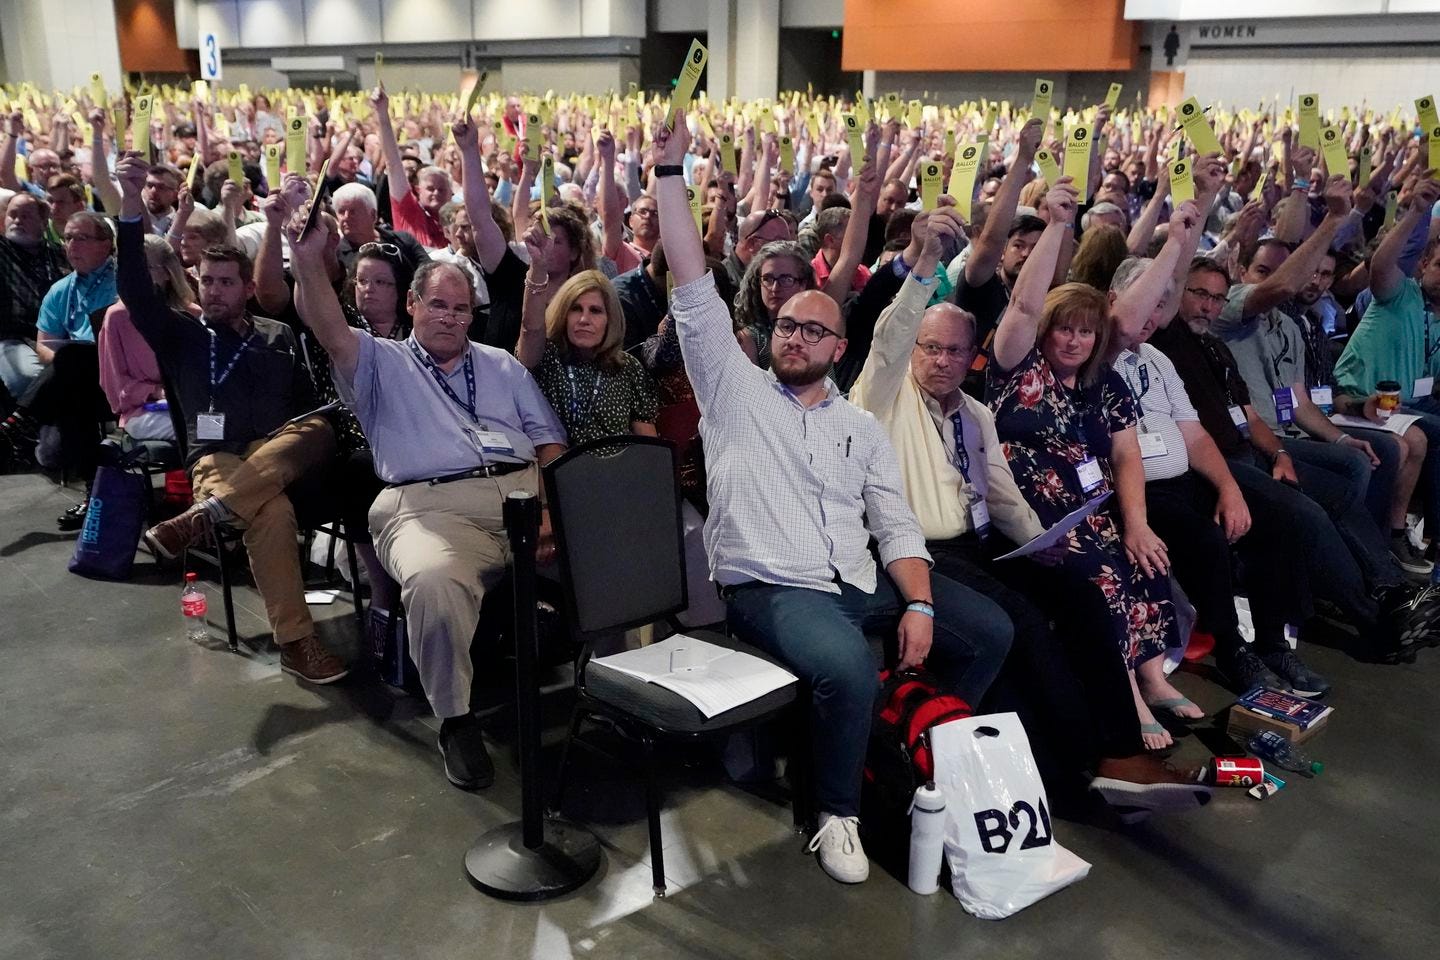 People voted on a motion during the annual Southern Baptist Convention meeting Tuesday in Nashville.